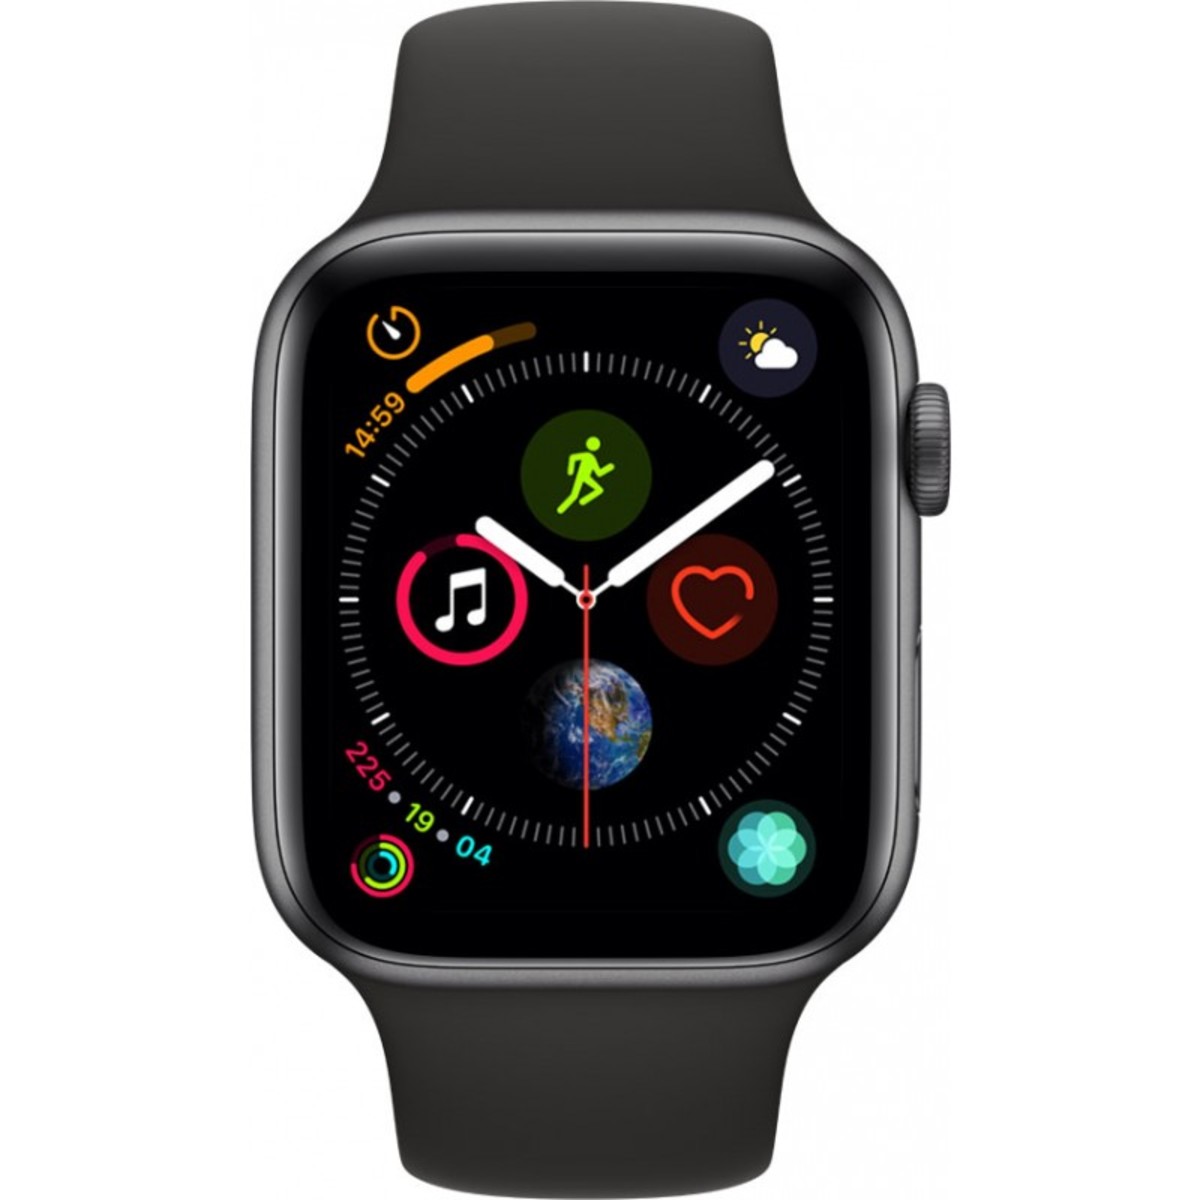 Apple Watch Series 4 - GPS 44mm Space Grey Aluminium Case with Black Sport Band